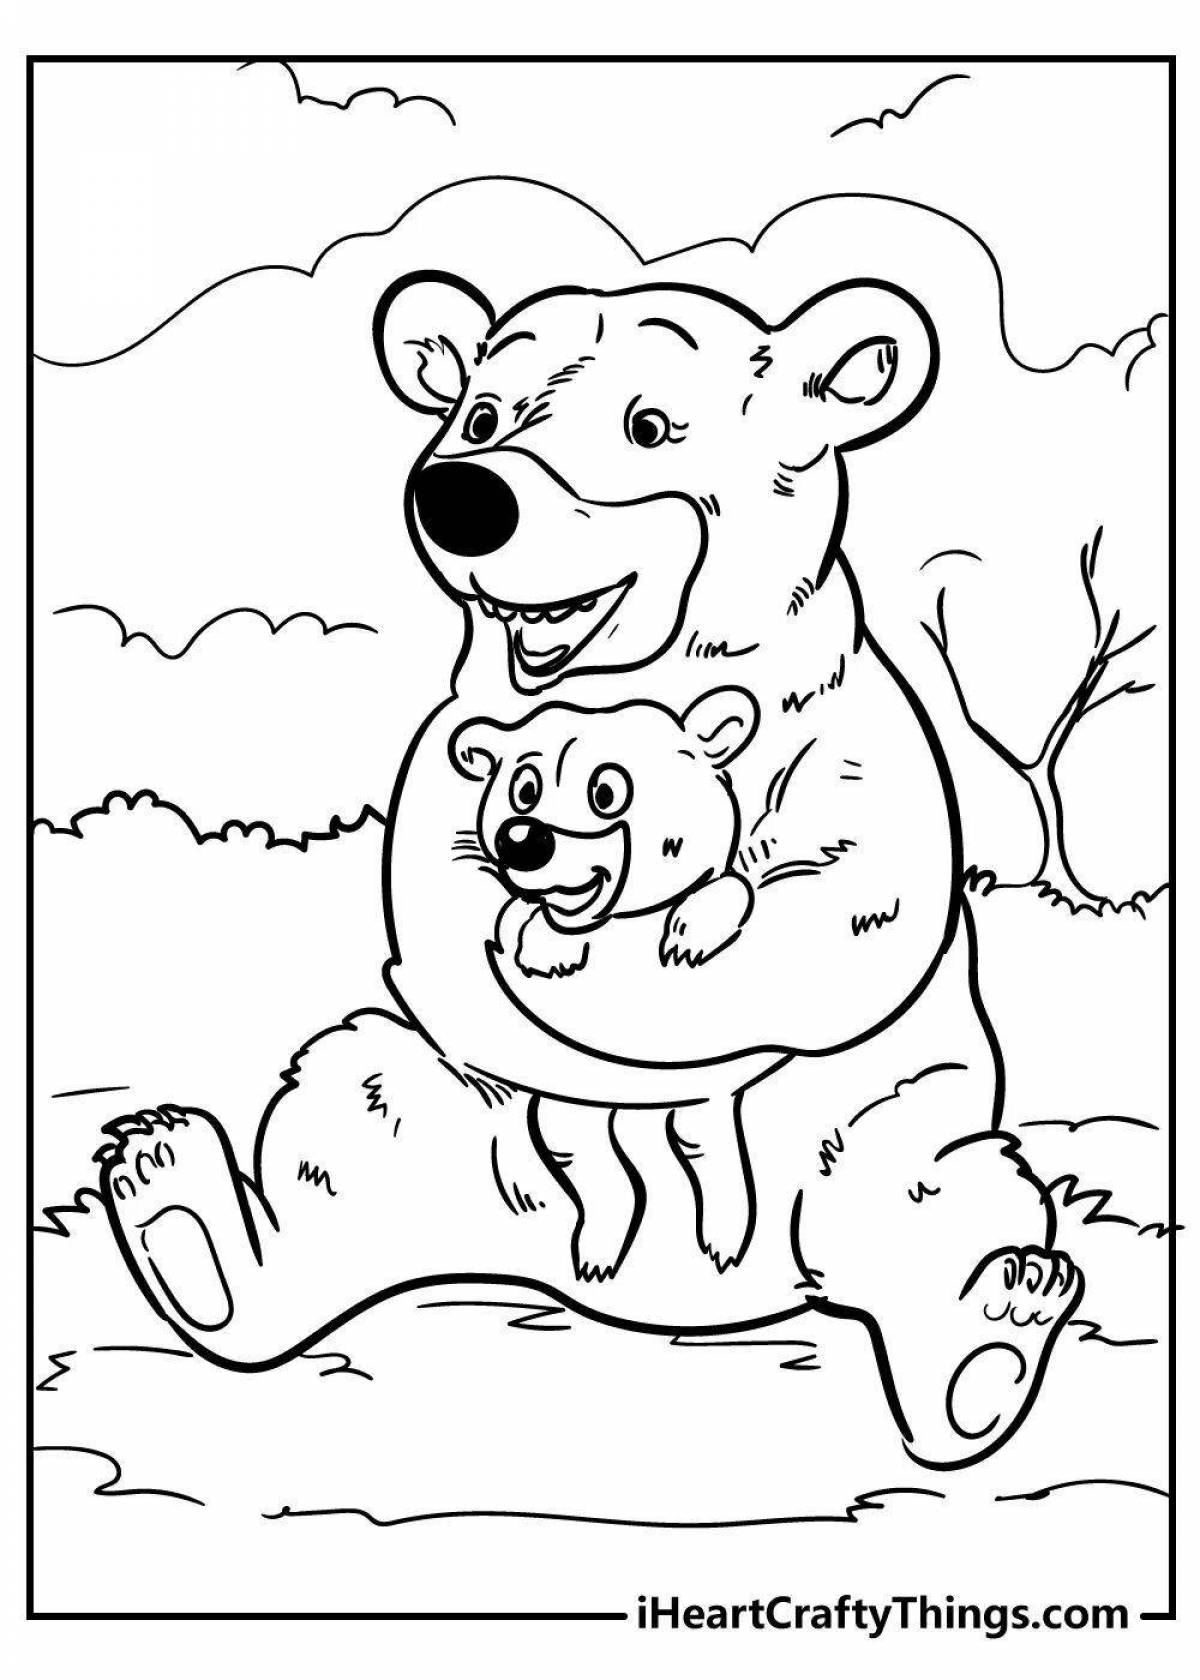 Cute teddy bear coloring book for 5-6 year olds